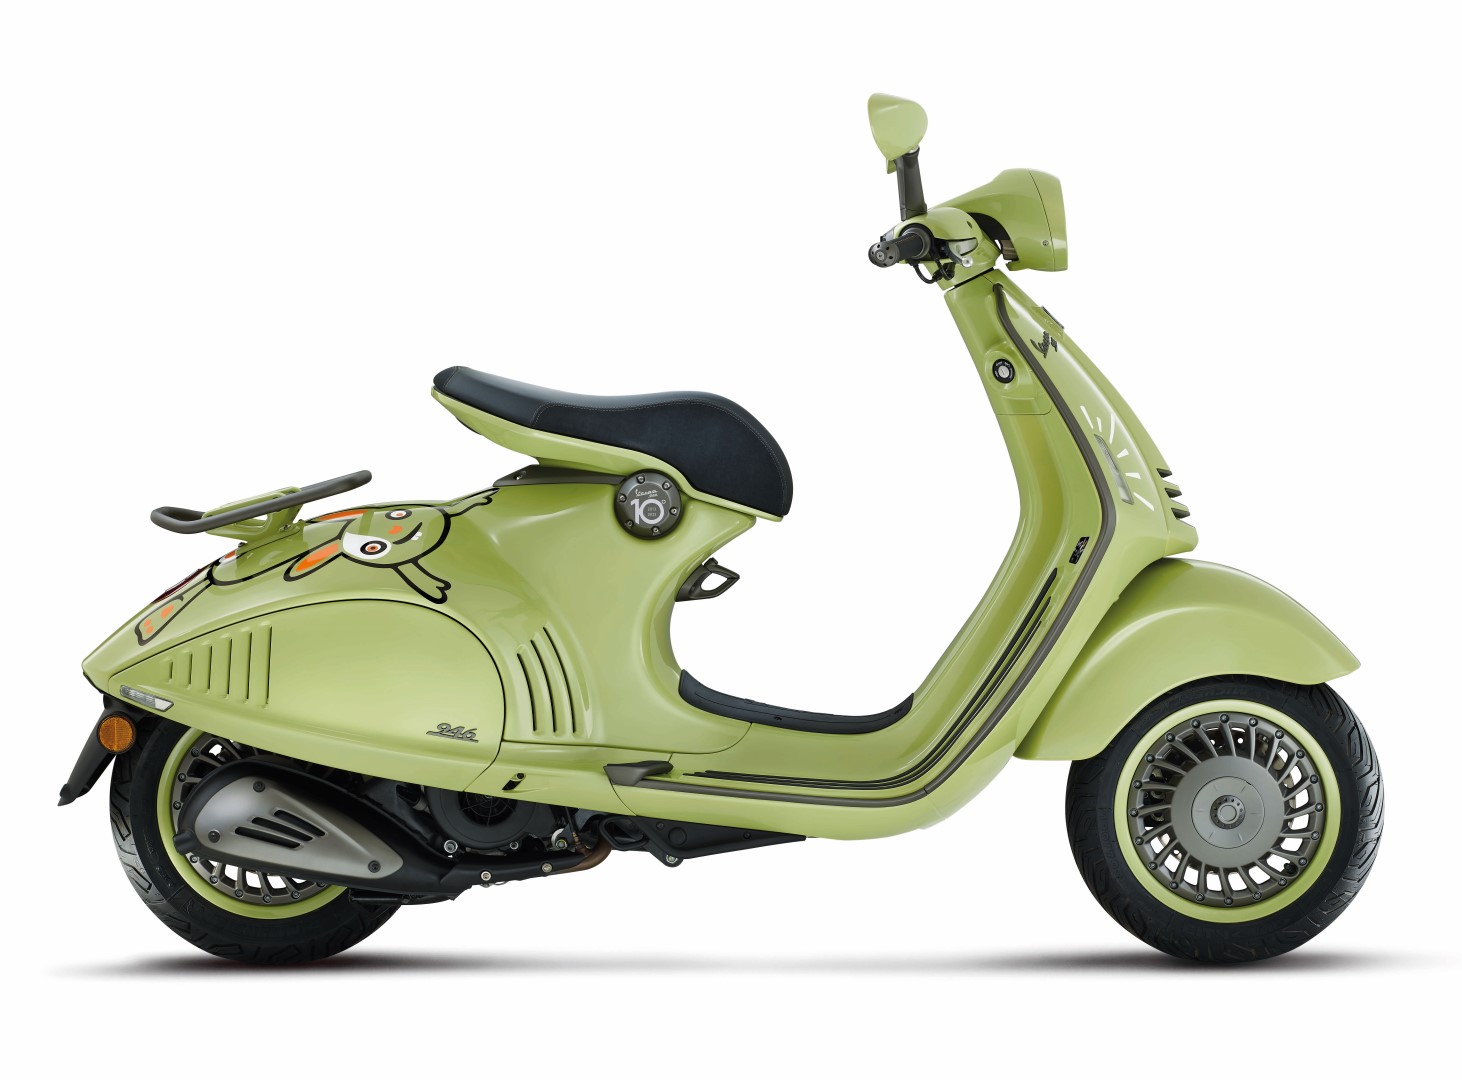 Vespa 946 10th anniversary edition now in Malaysia for RM99,900